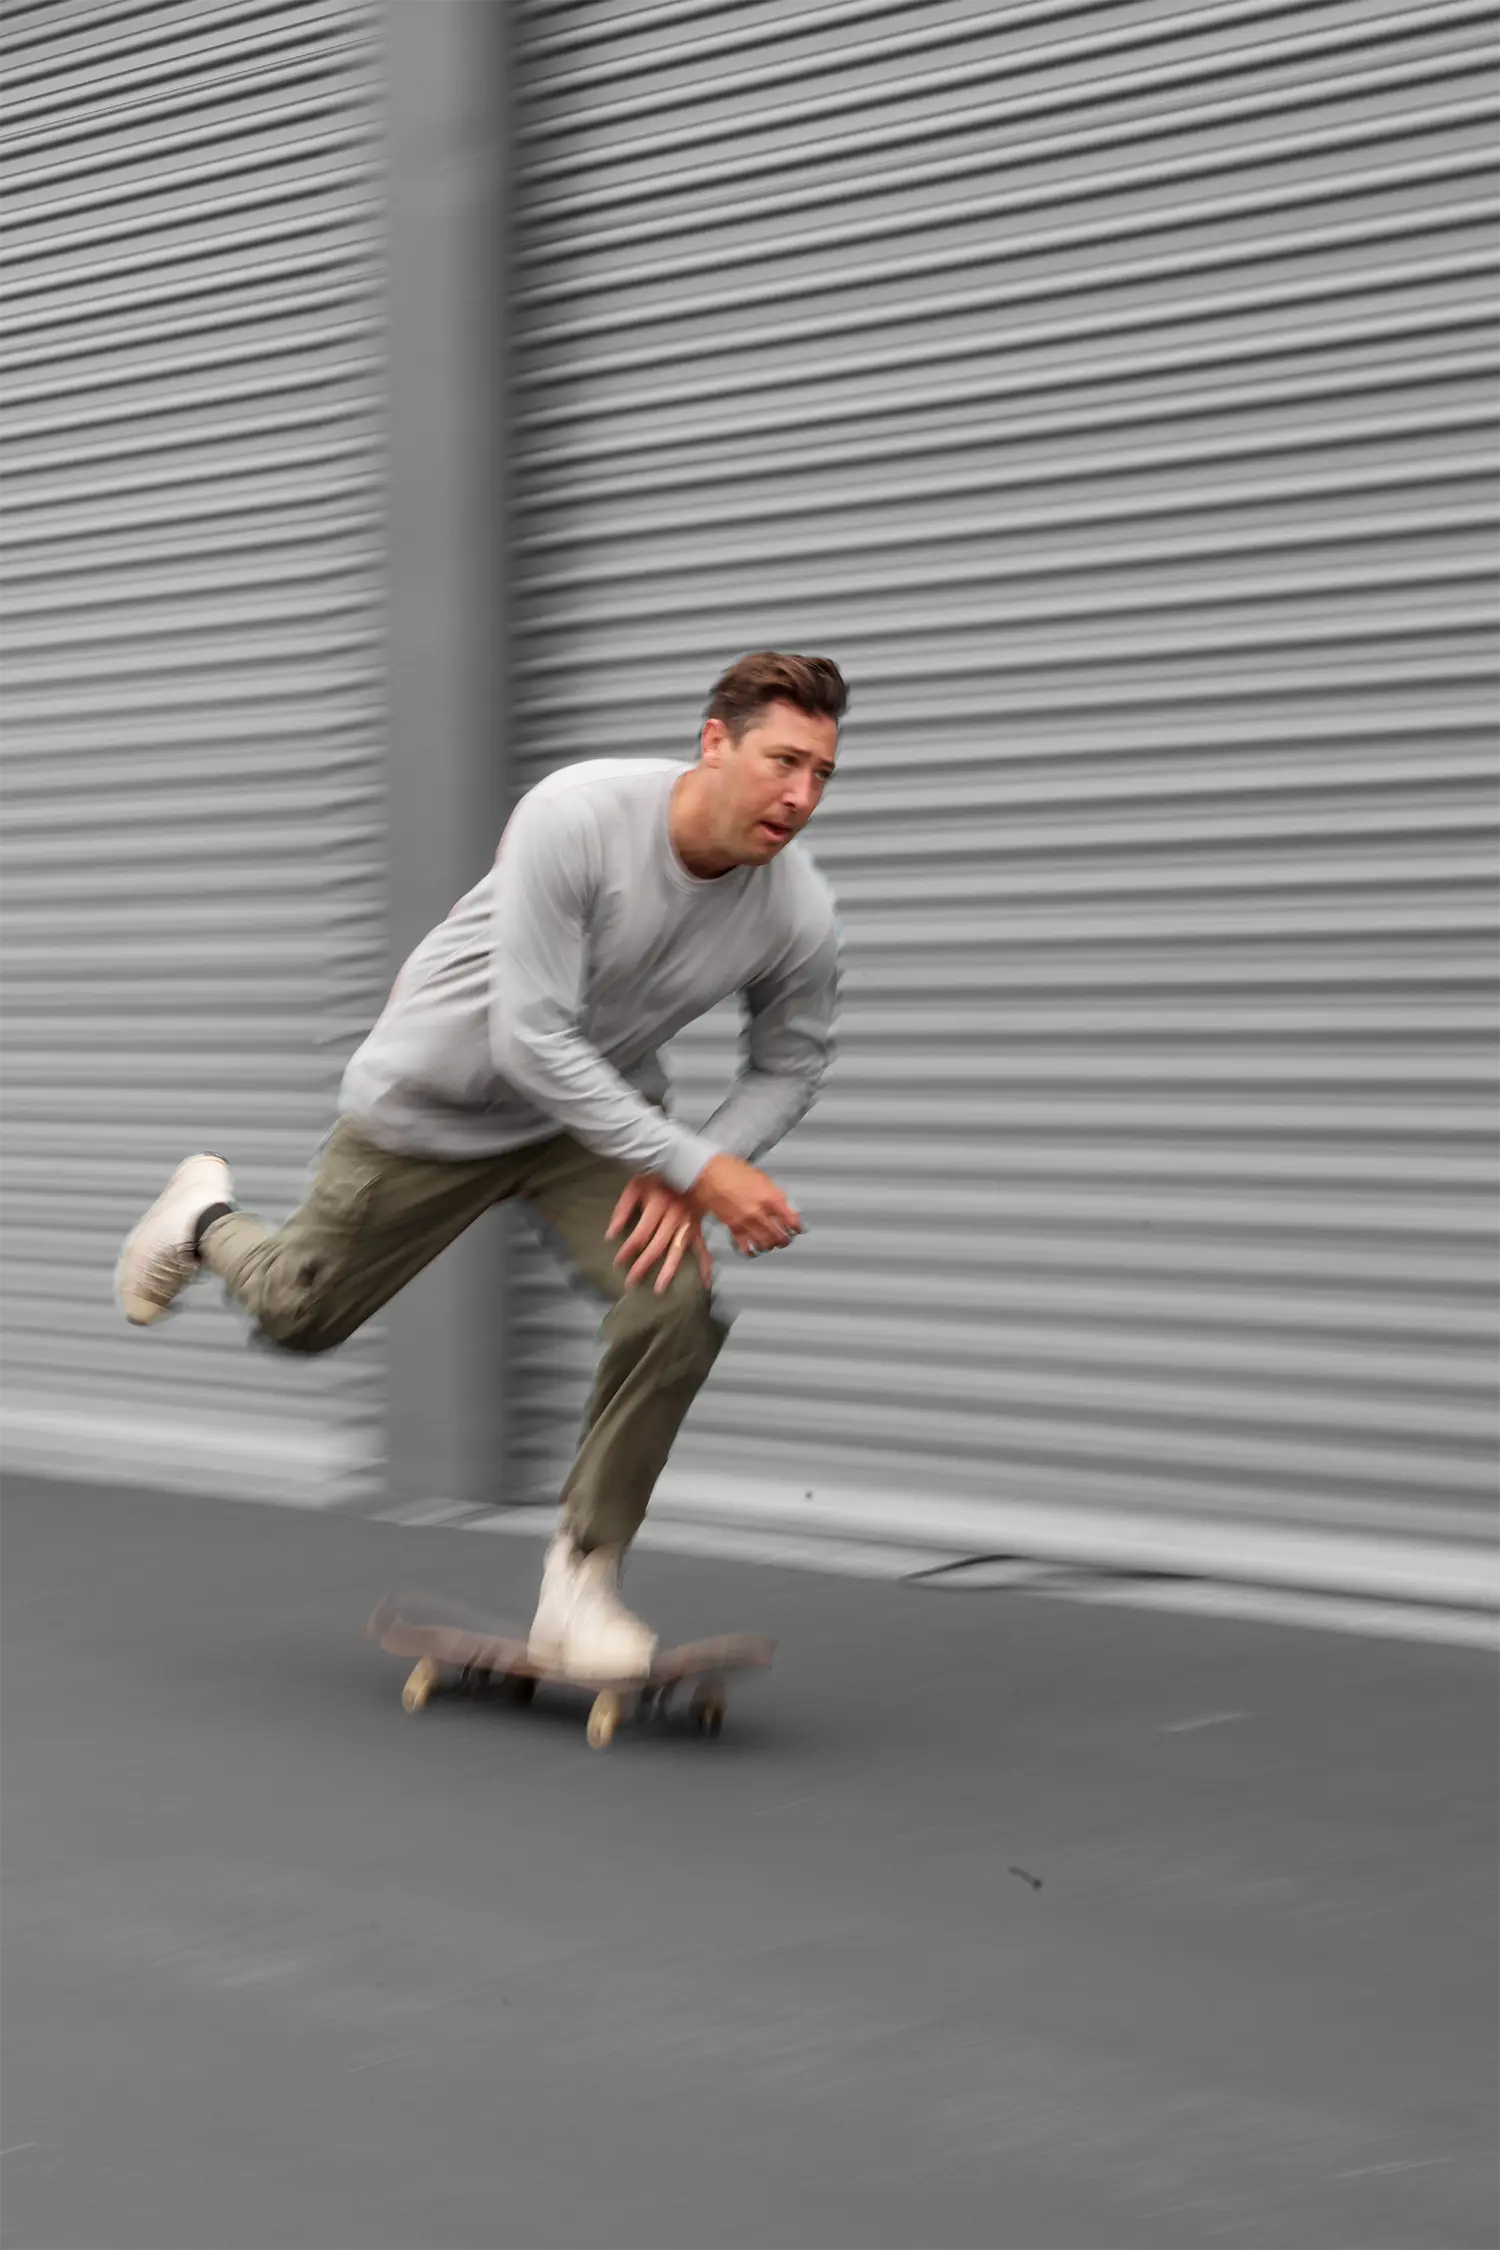 Mikey Taylor in motion on skateboard